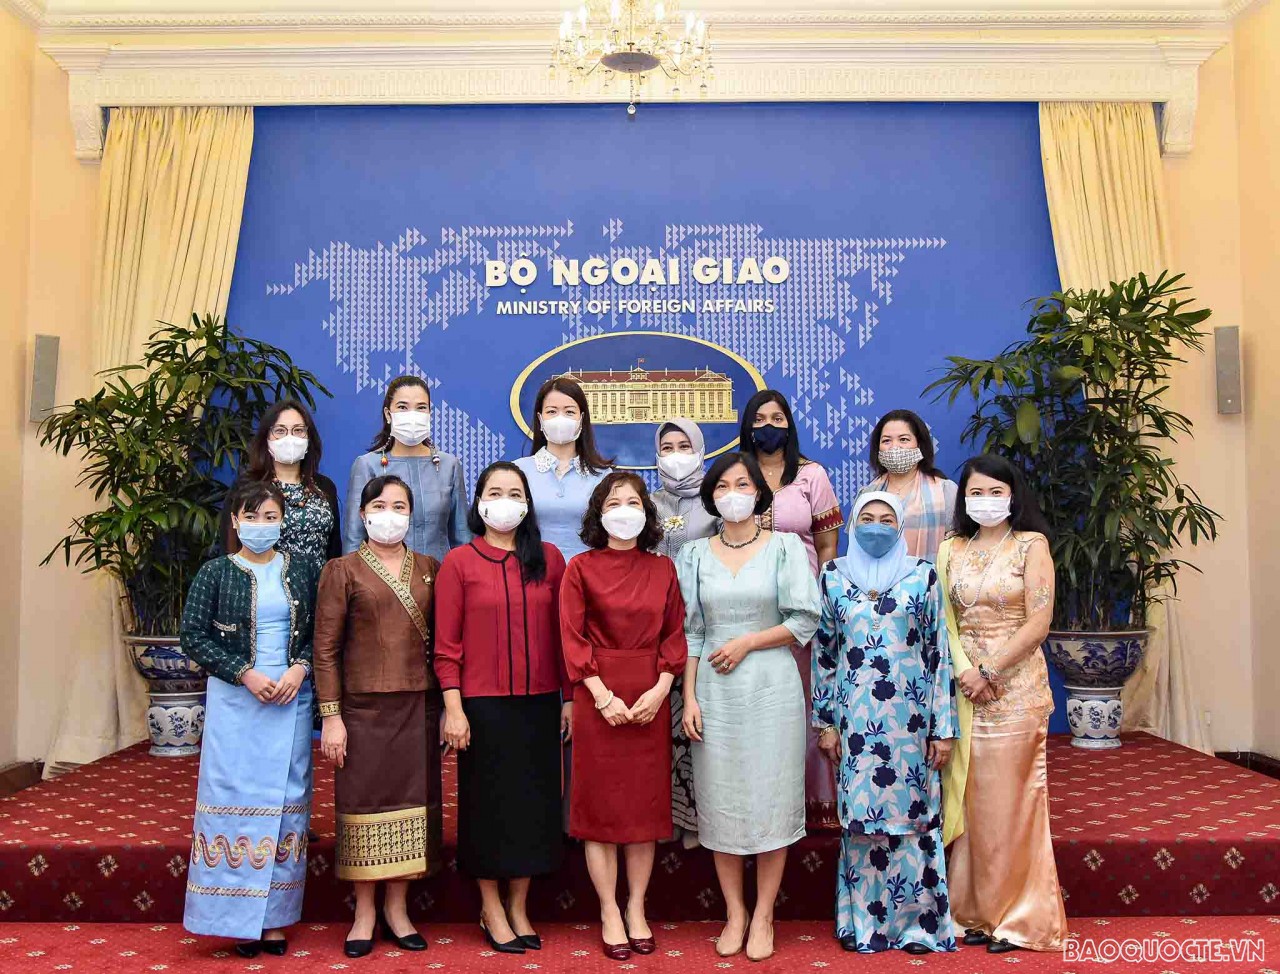 AWCH: The glue that bonds the women of the ASEAN community in Viet Nam